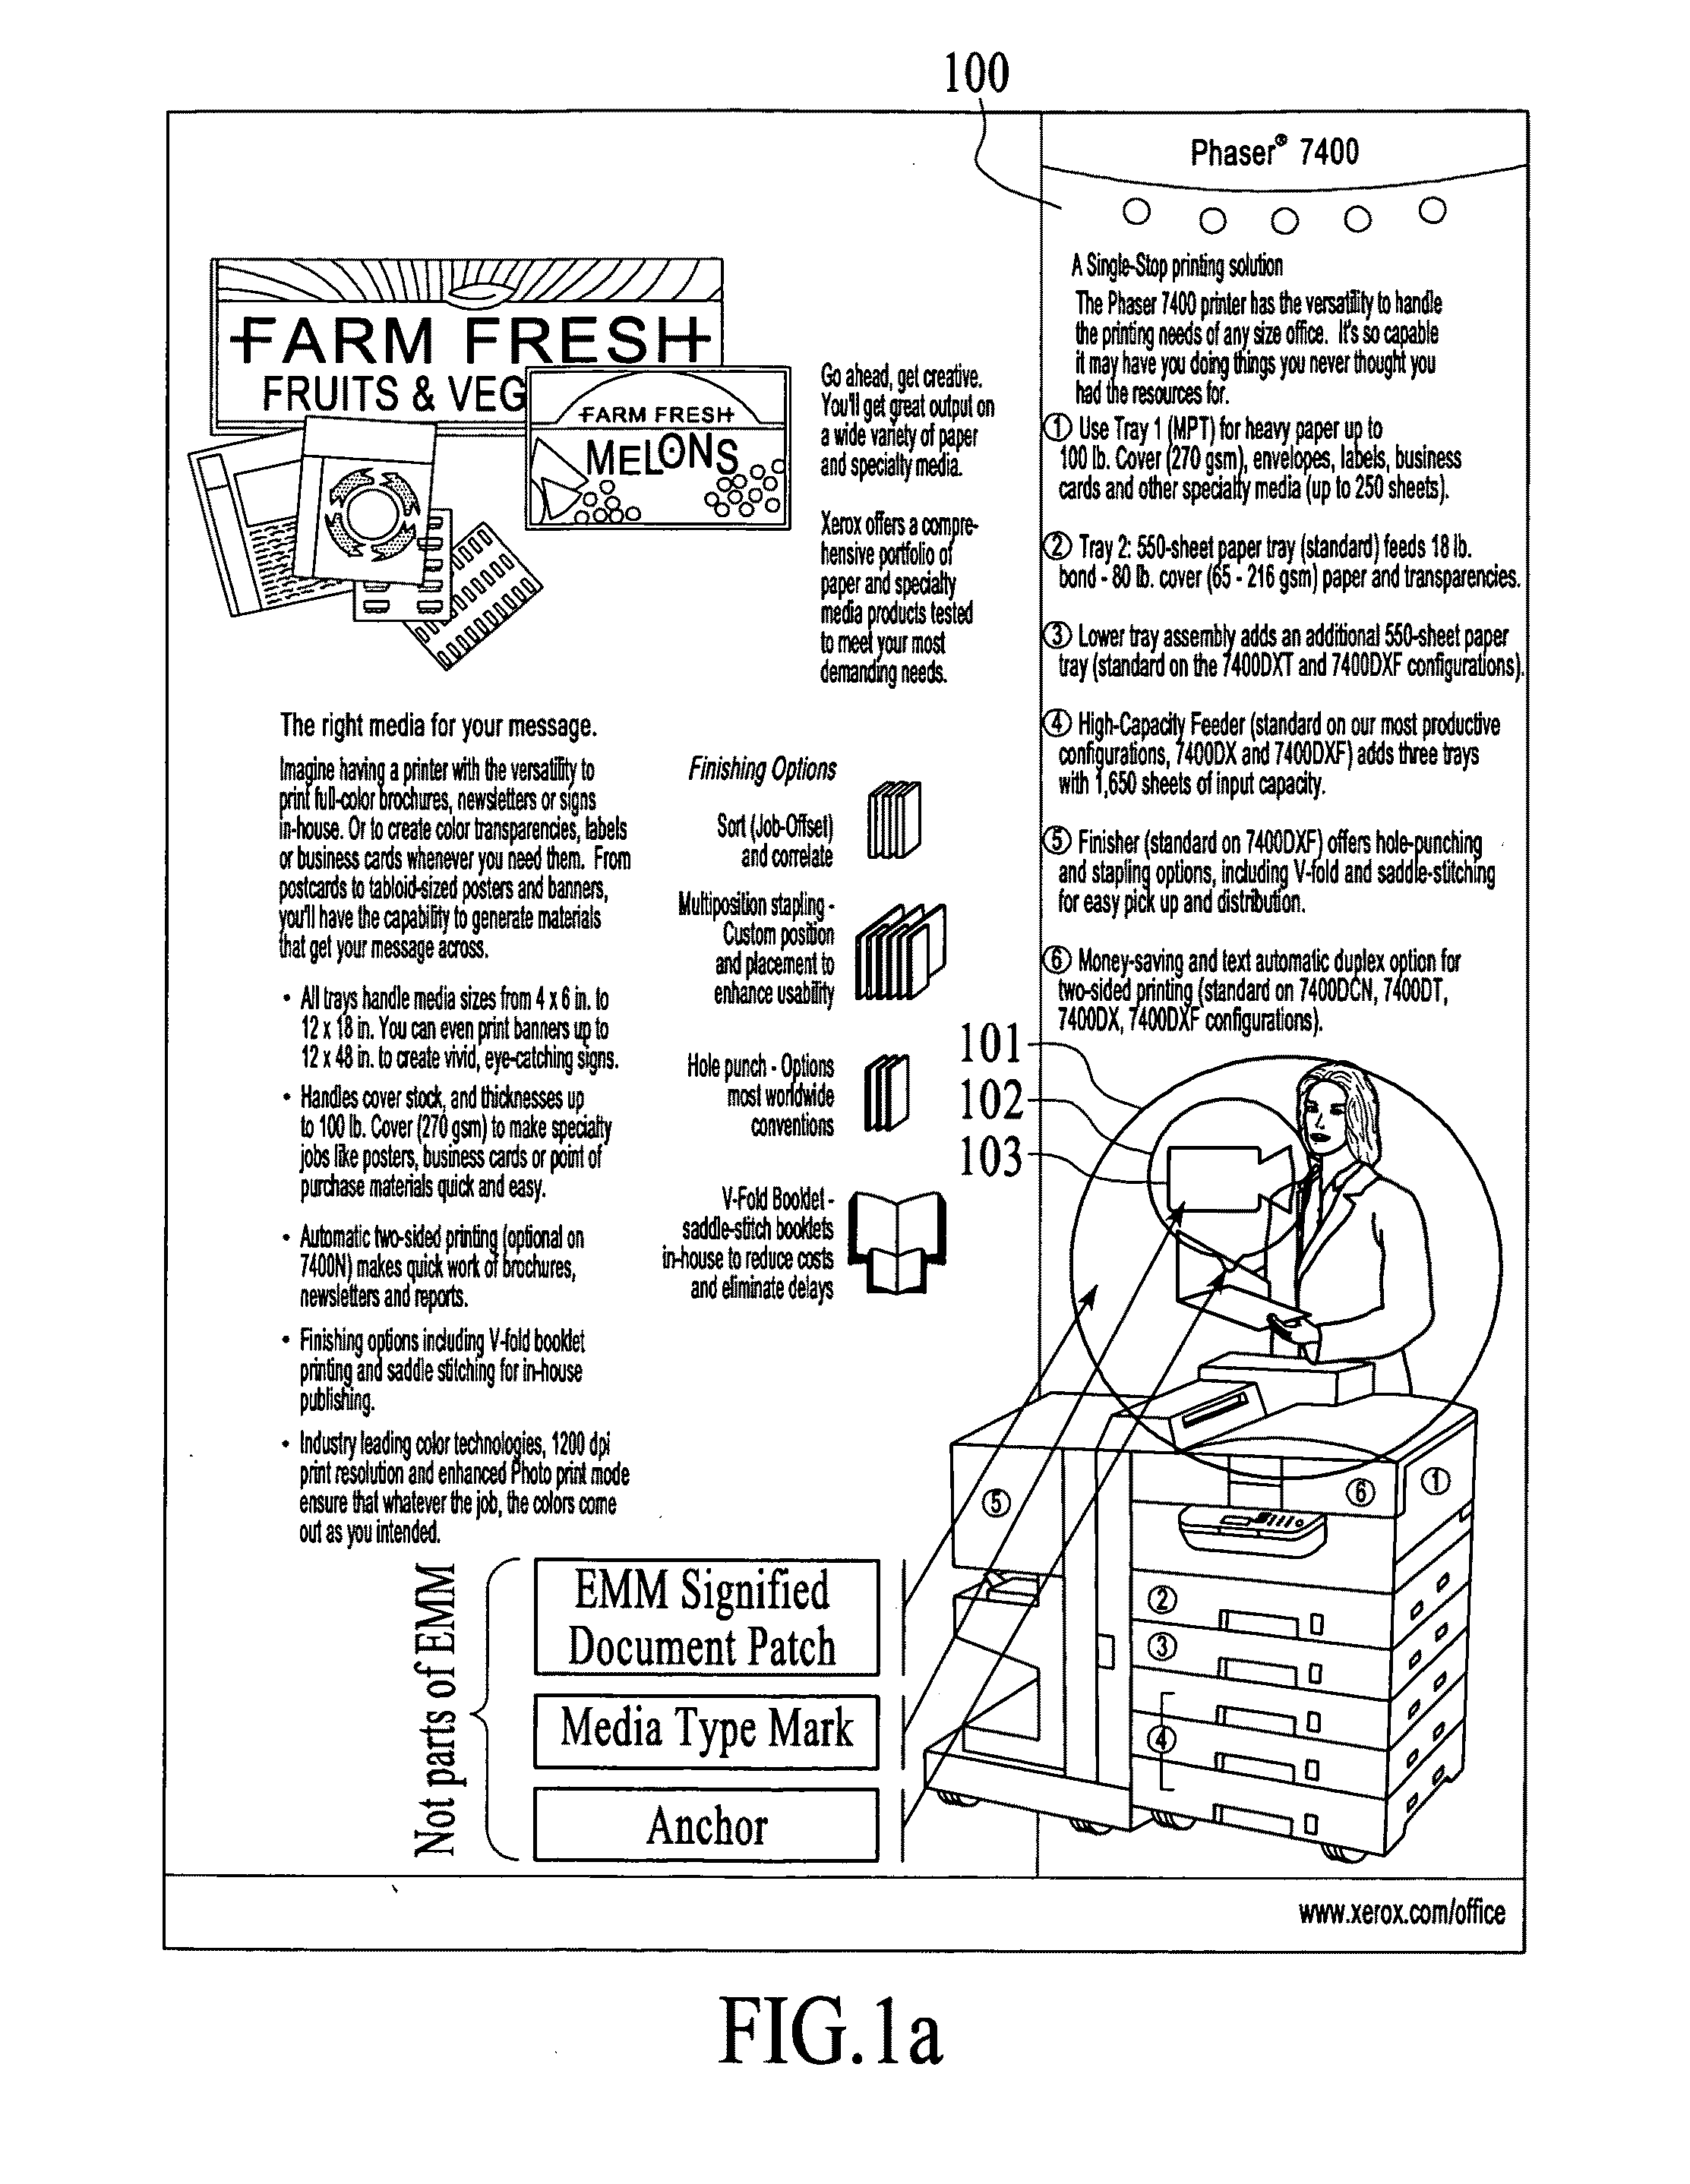 Embedded media markers and systems and methods for generating and using them